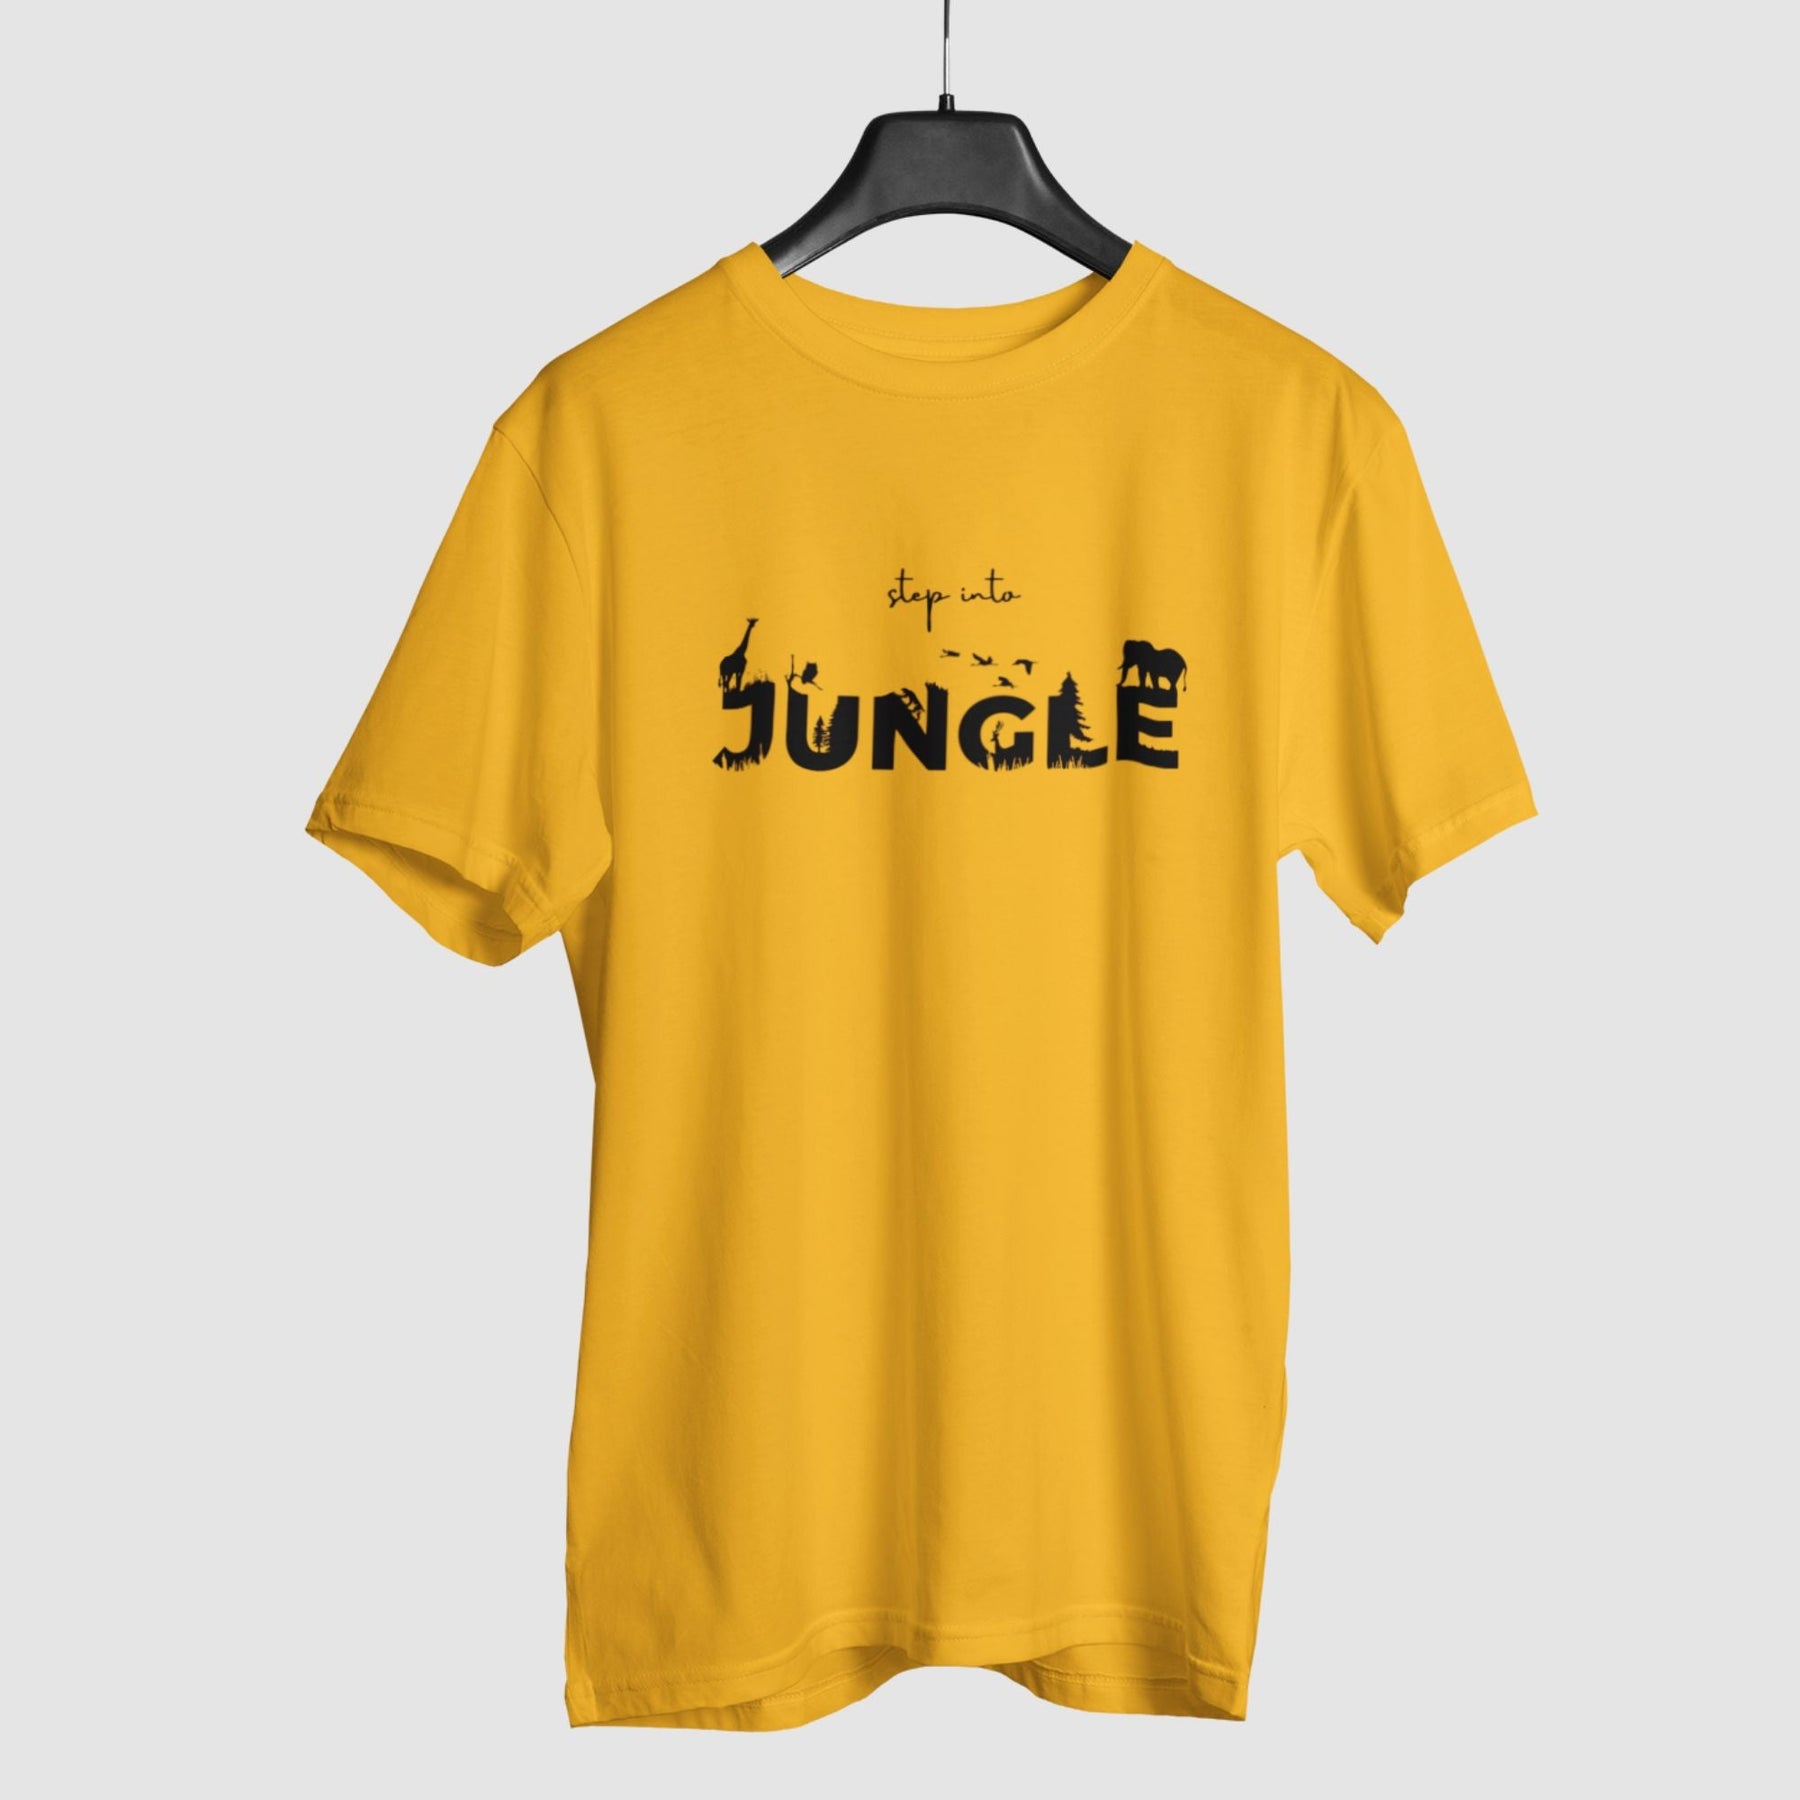 step-into-the-jungle-golden-yellow-round-neck-printed-wildlife-theme-hanging-cotton-t-shirt-gogirgit